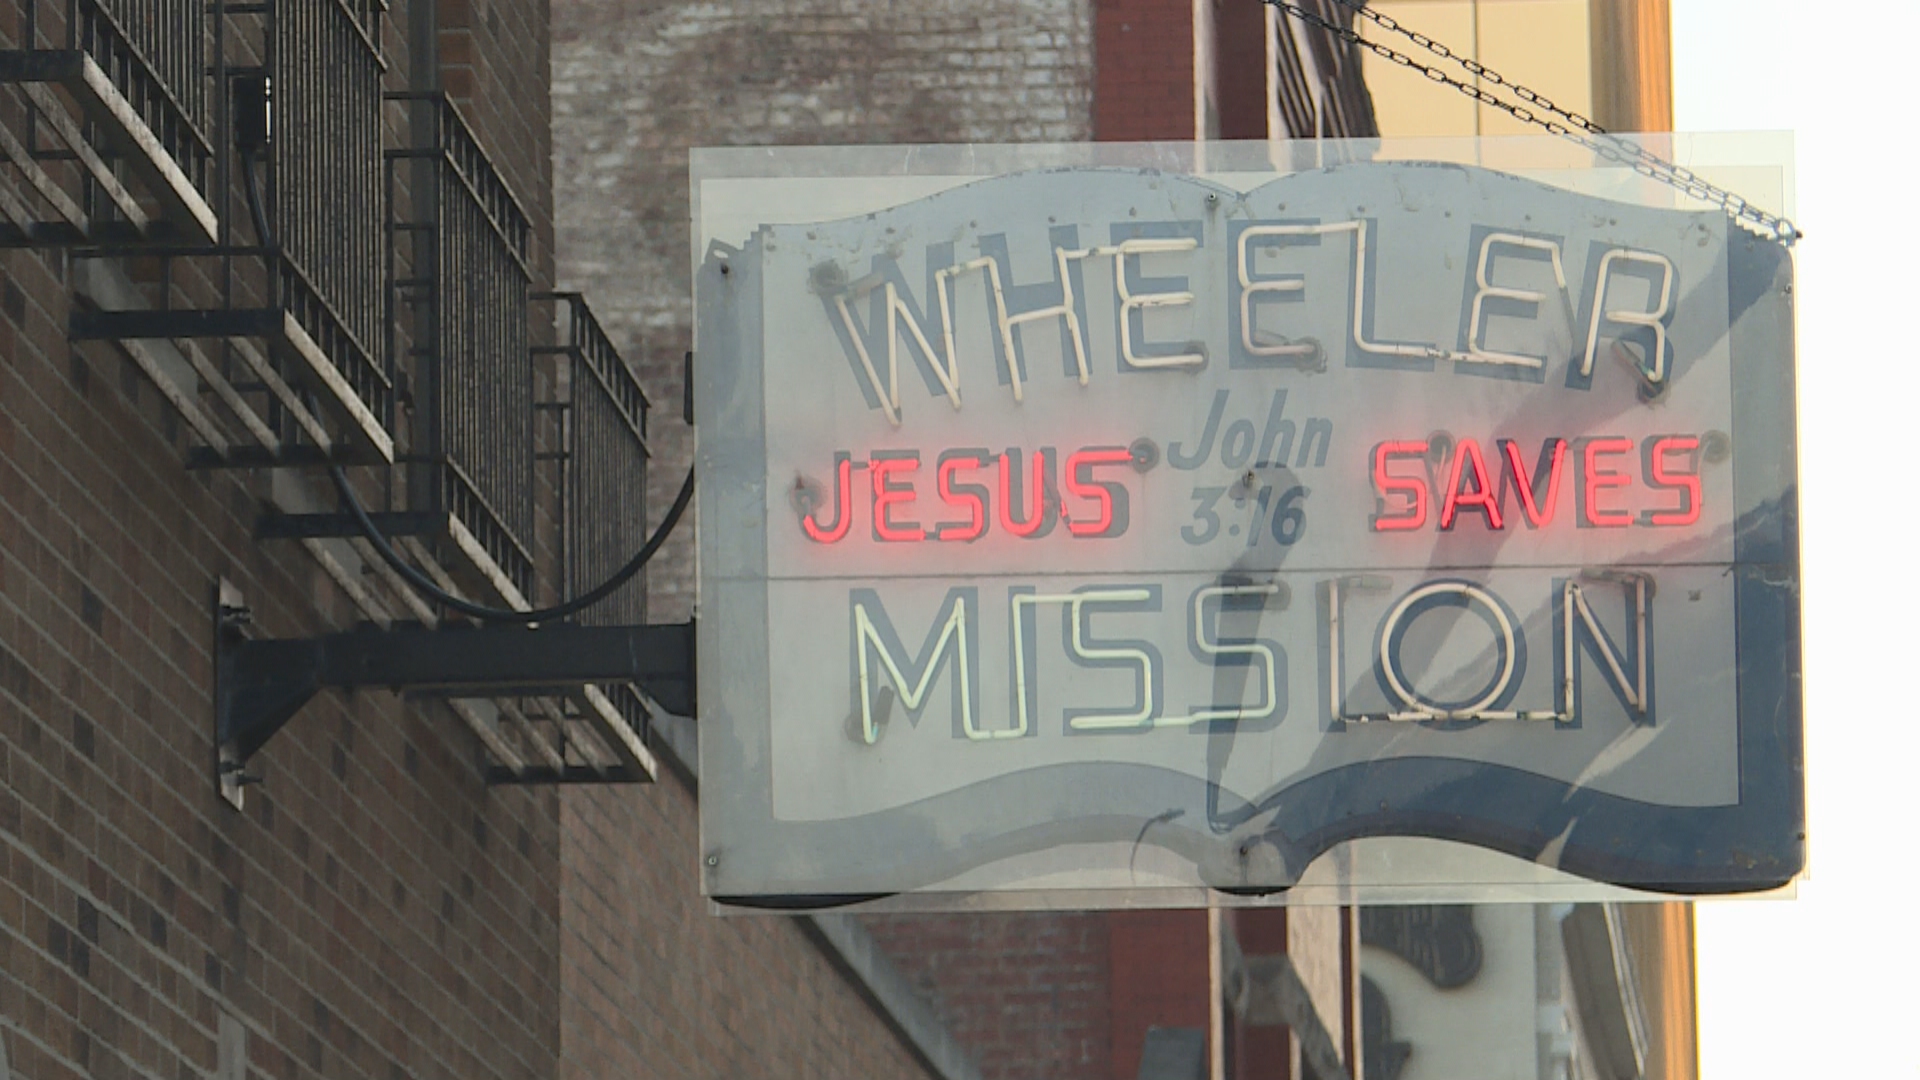 Wheeler Mission prepares for more people during snowstorms